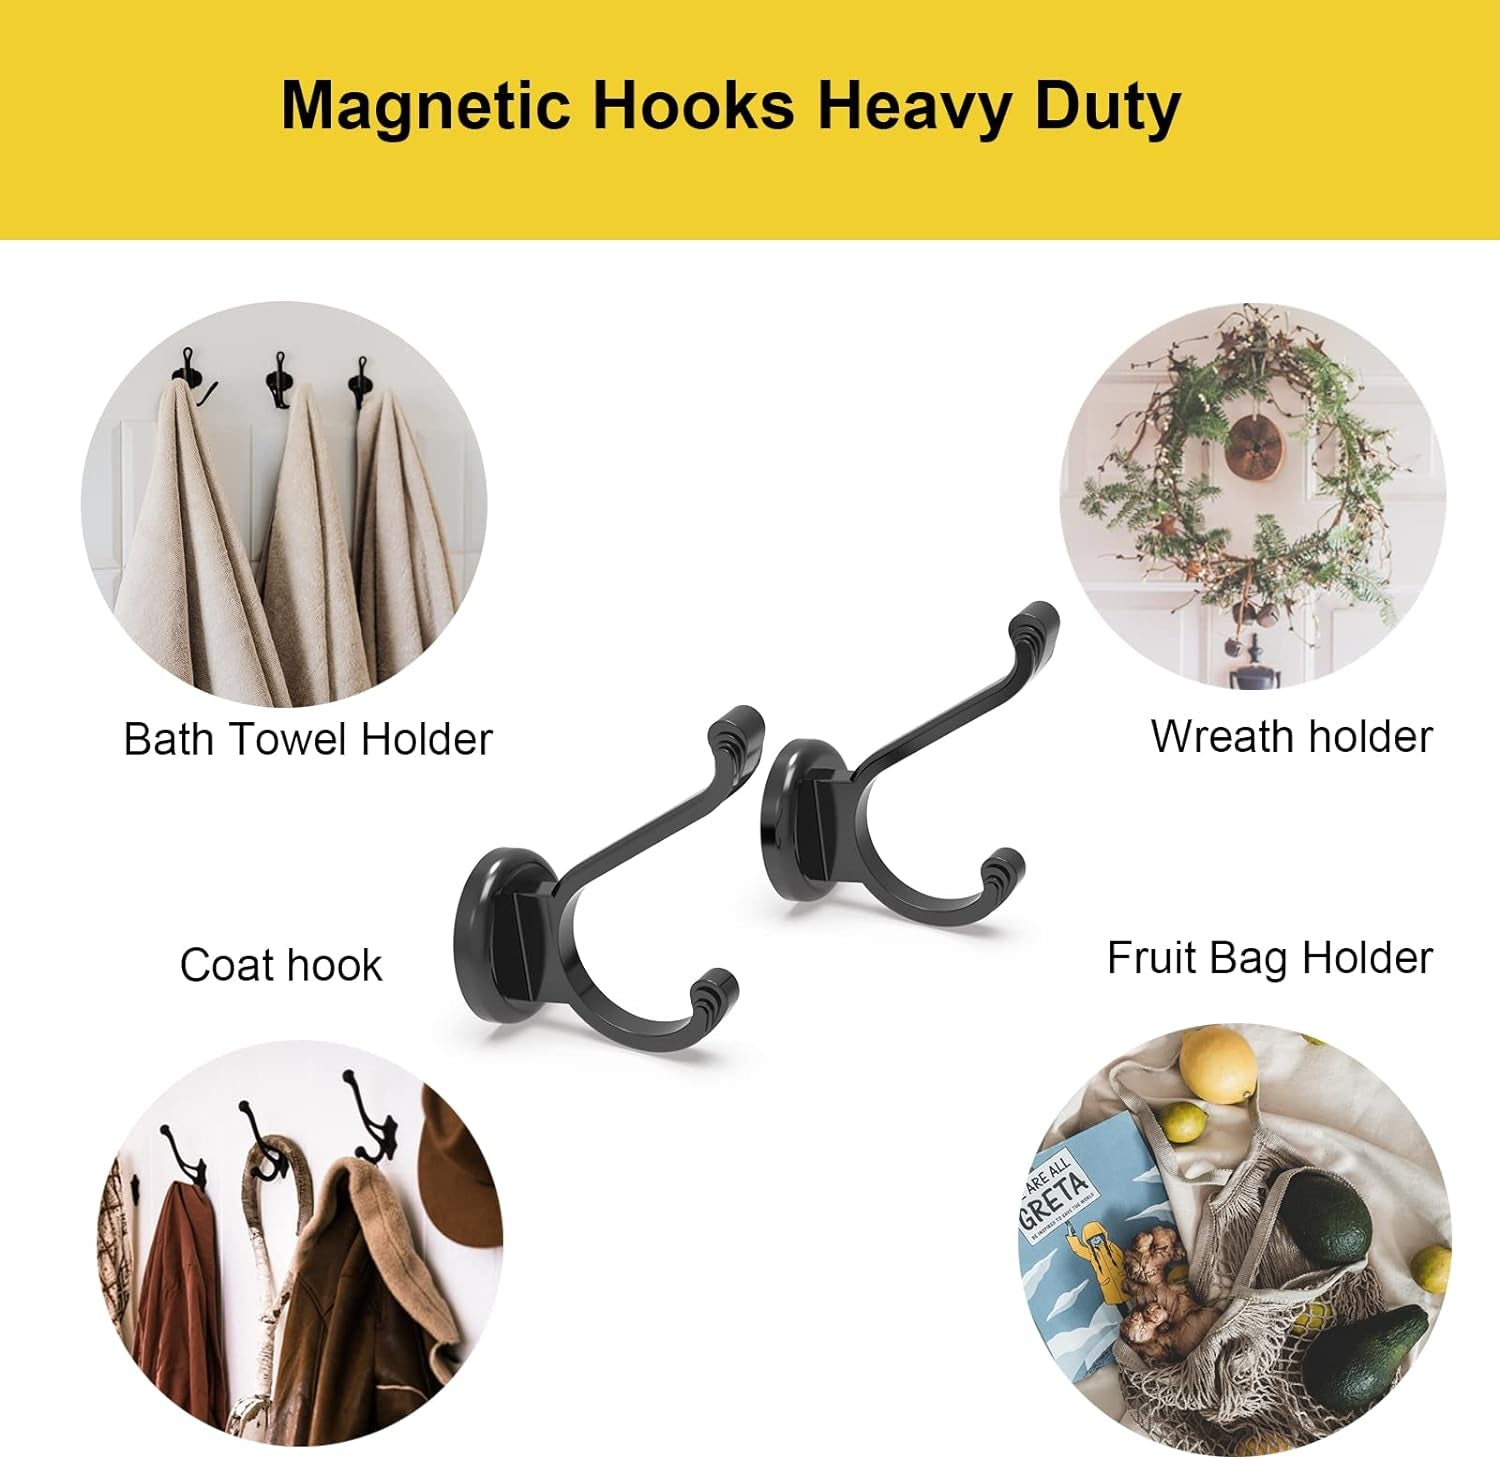 Ant Mag Magnetic Hooks Heavy Duty 140Lbs Neodymium Magnet Wall Hooks for Hanging Coats Robes Backpacks Bags Hats Keys Mugs Cups Towels